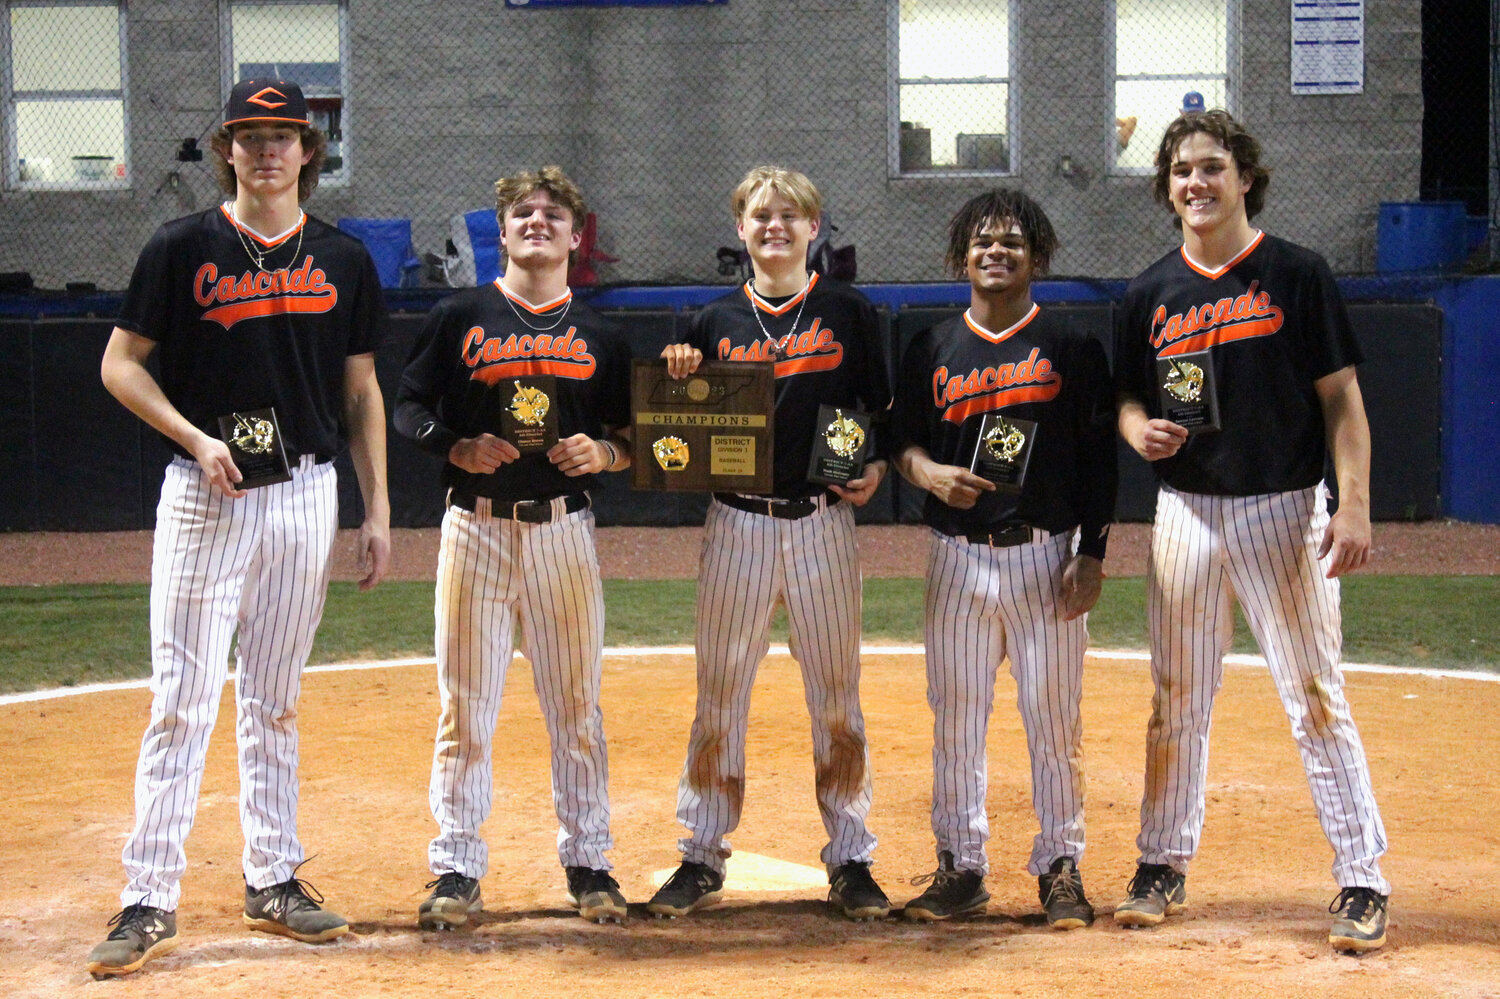 Members of the Cascade baseball team that earned All-District honors are (from left) Walker Craig, Chance Brown, Noah McGeary, Jaxon Sheffield, and Sawyer Lovvorn.